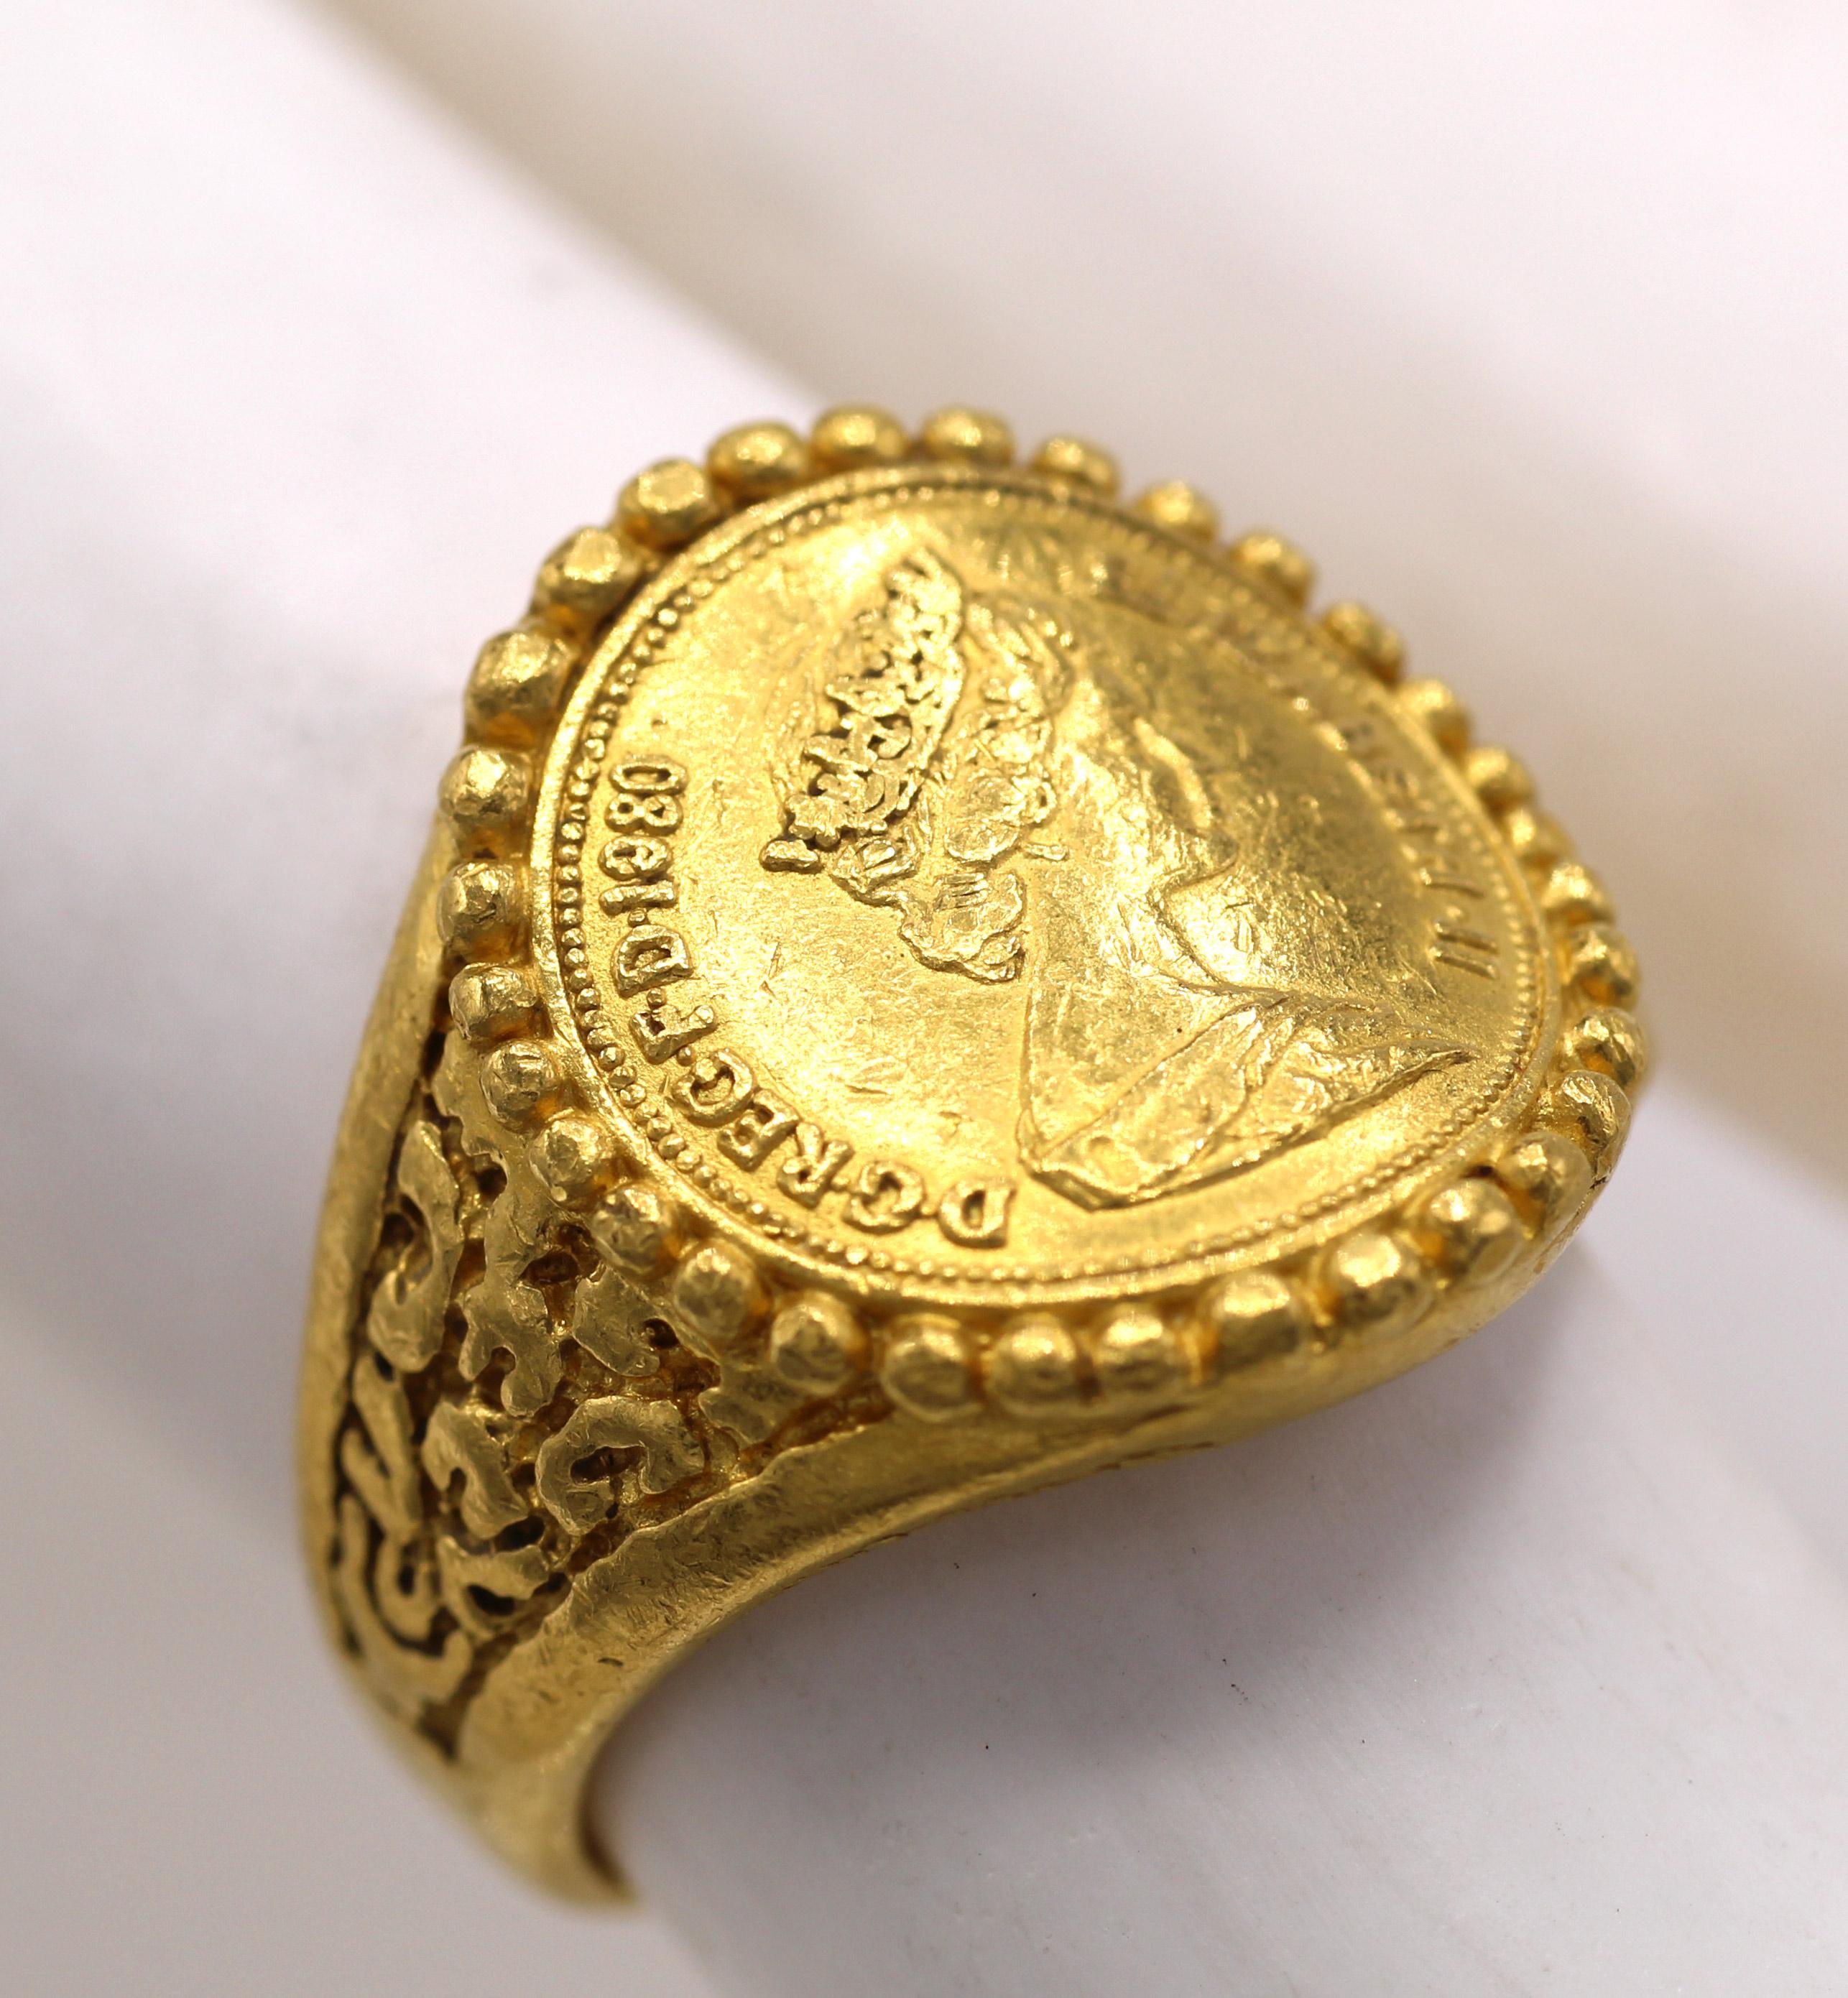 Beautifully handcrafted in 24 Karat yellow gold this ring features a cold coin dedicated to Queen Elizabeth II set in a boarder of gold beads with fine hand-engraving on either side of the shank. 